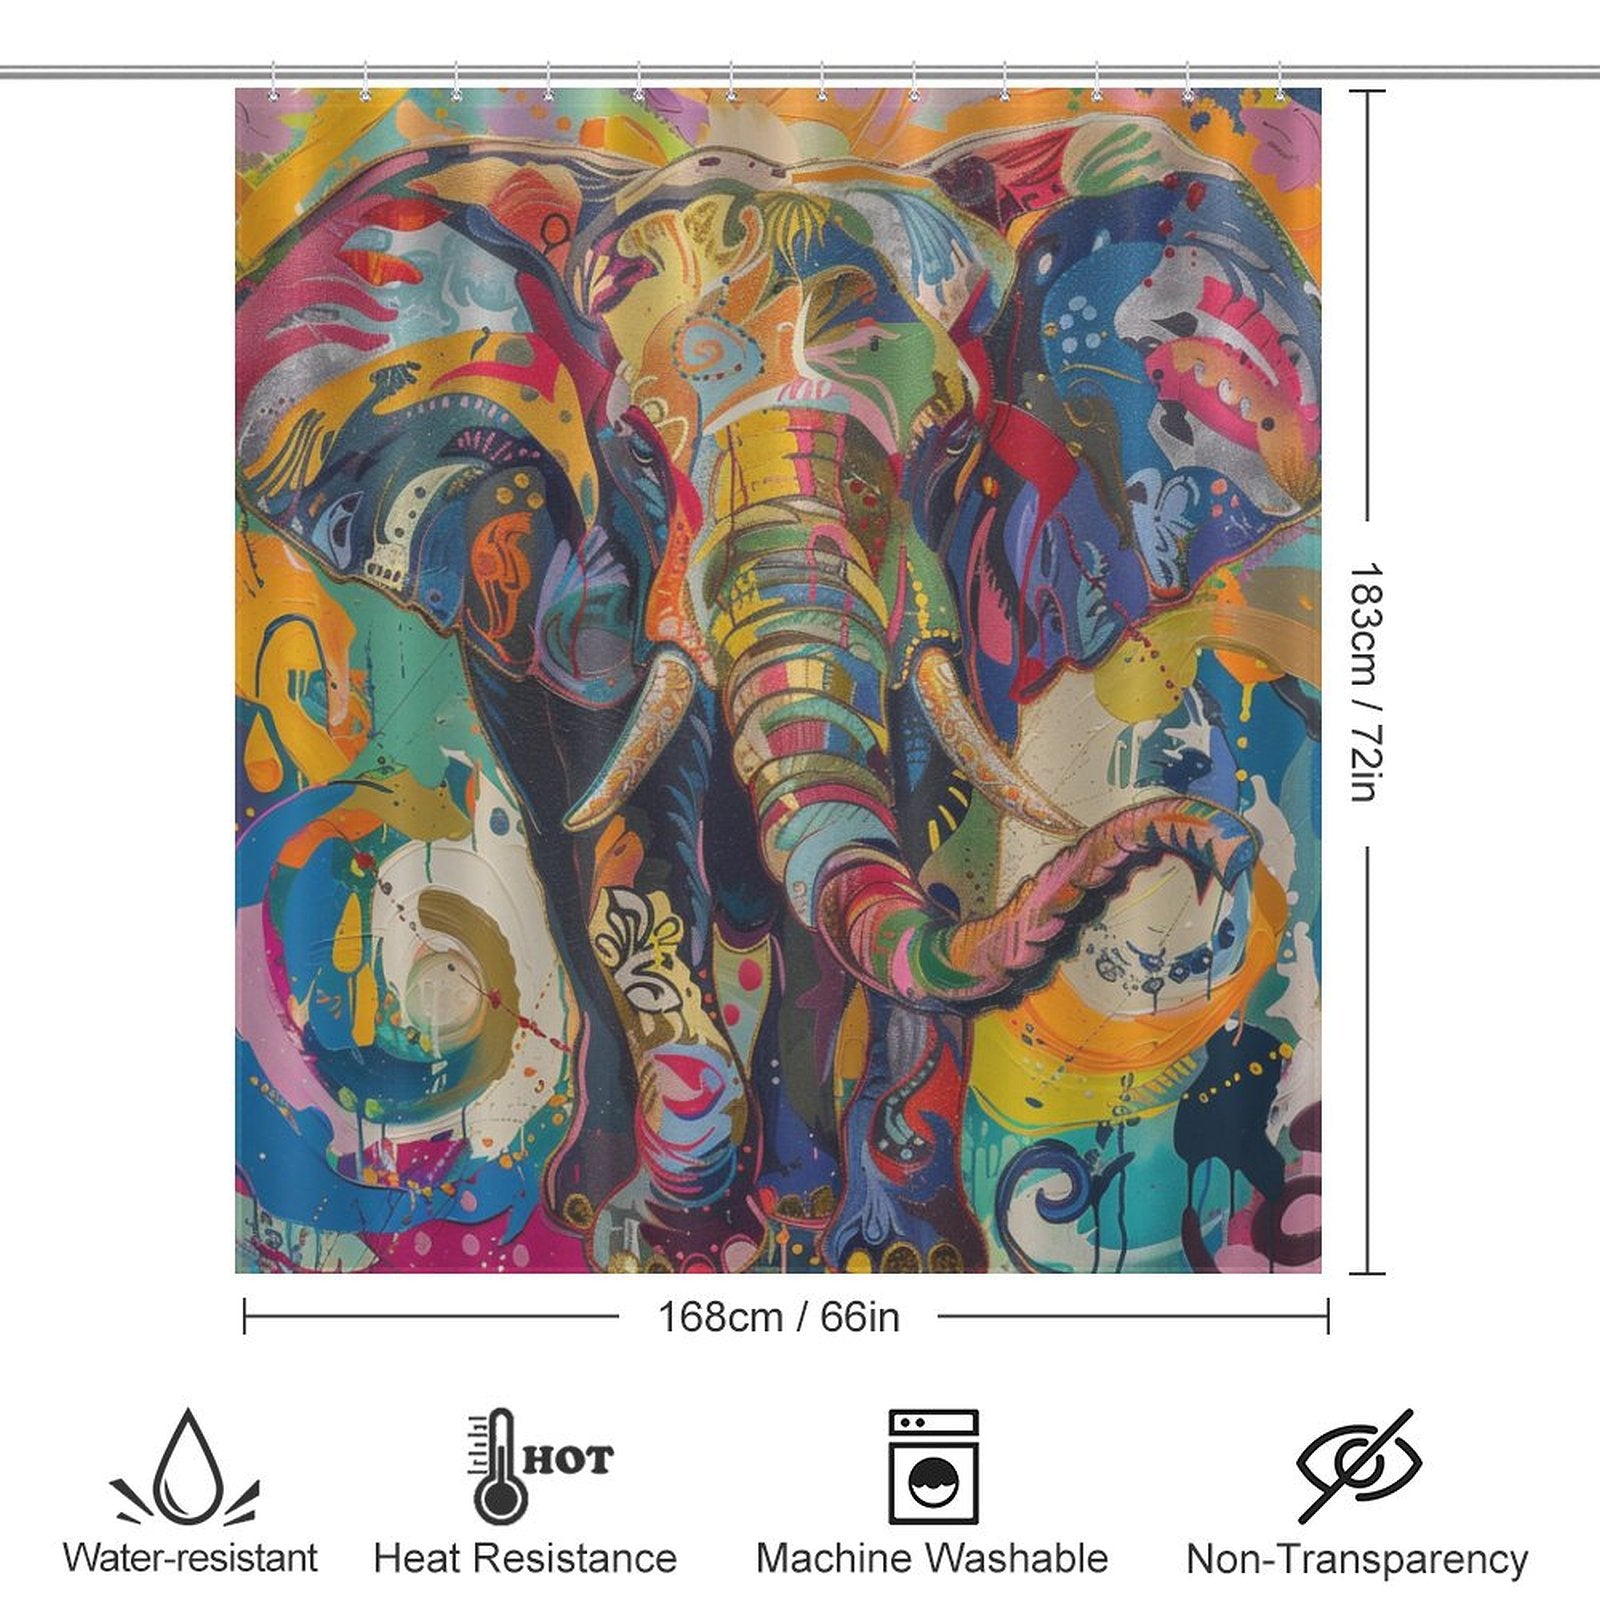 Add a splash of color to your bathroom decor with this Multi Colored Happy Elephant Shower Curtain-Cottoncat. Measuring 183 cm by 168 cm, this vibrant shower curtain is water-resistant, heat-resistant, machine washable, and non-transparent.